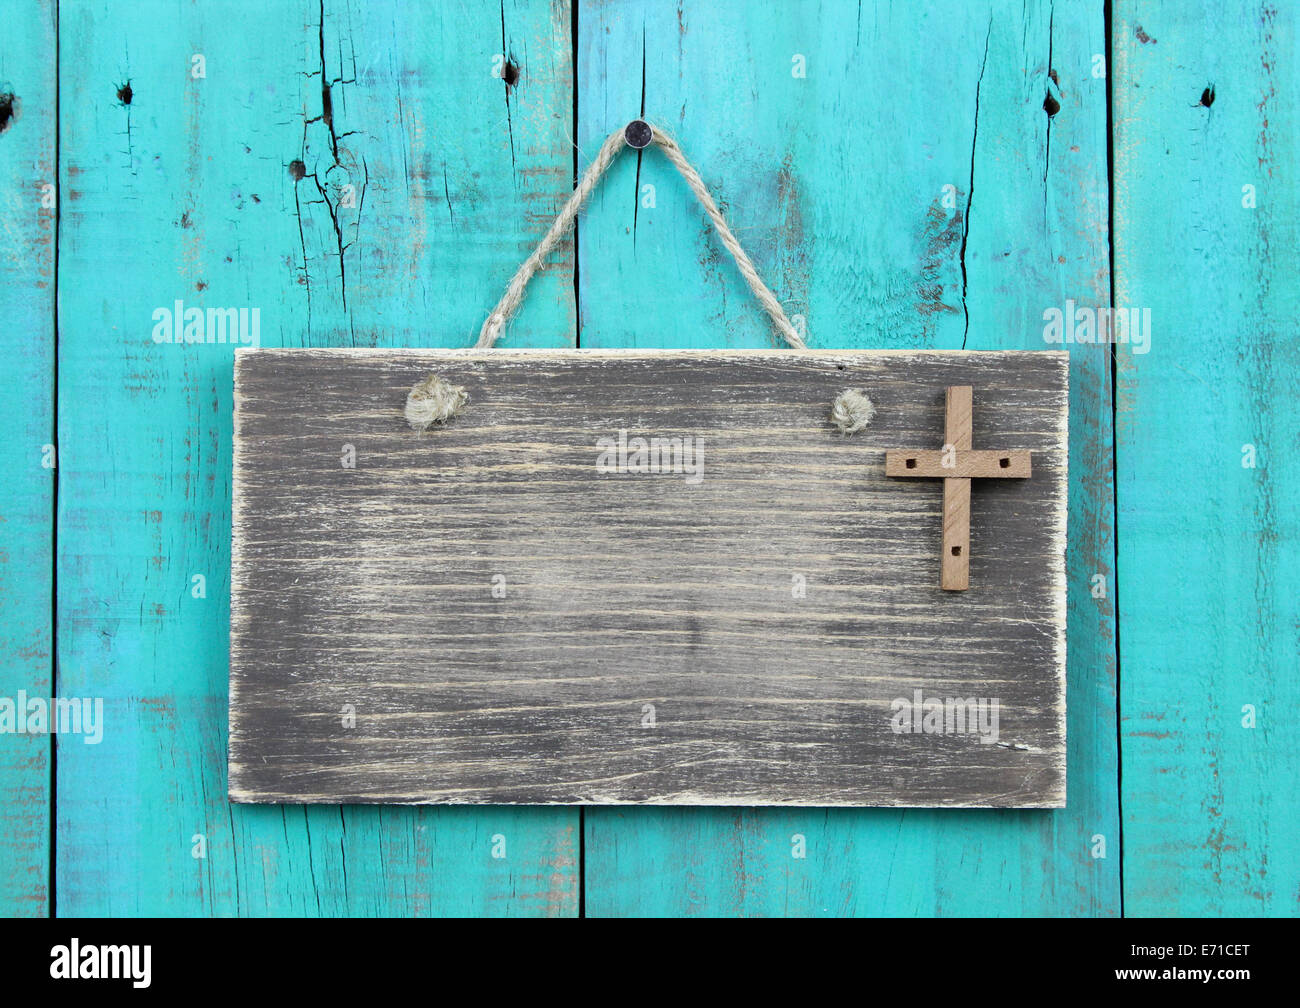 Weathered blank sign with wooden cross hanging on antique teal blue rustic wood door Stock Photo